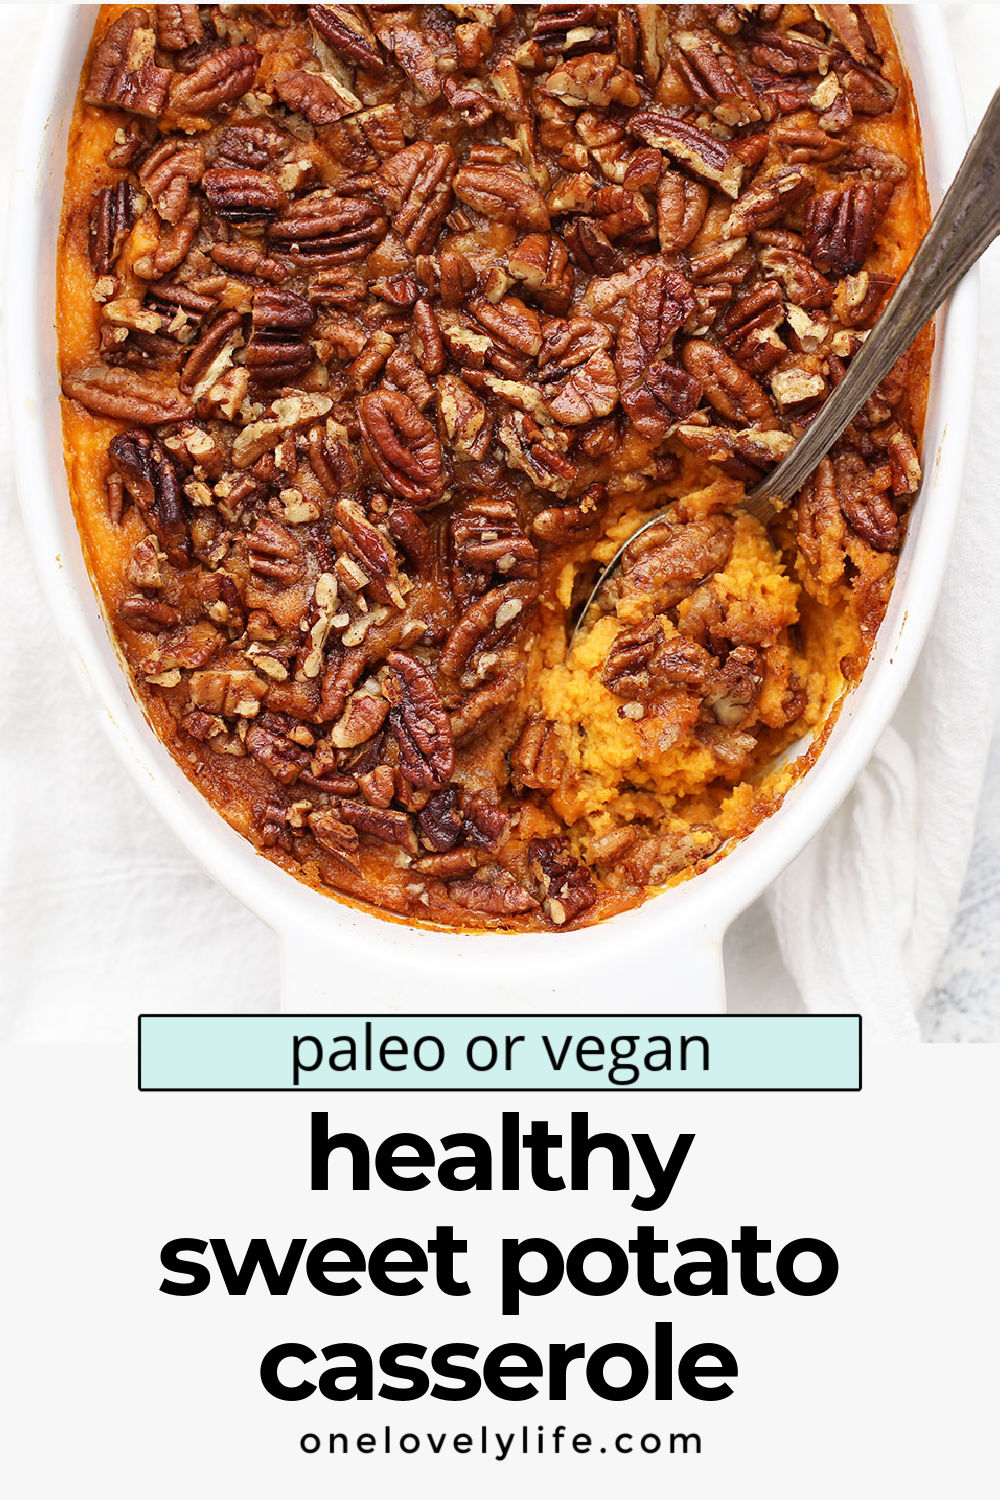 Paleo (or Vegan!) Sweet Potato Casserole - Gluten free, naturally sweetened, and totally delicious! // Vegan sweet potato casserole recipe // paleo sweet potato casserole recipe // healthy sweet potato casserole recipe // dairy free sweet potato casserole recipe // gluten free sweet potato casserole recipe // Thanksgiving side dish // Paleo thanksgiving // healthy thanksgiving recipe #sidedish #sweetpotatocasserole #paleo #vegan #glutenfree #healthy